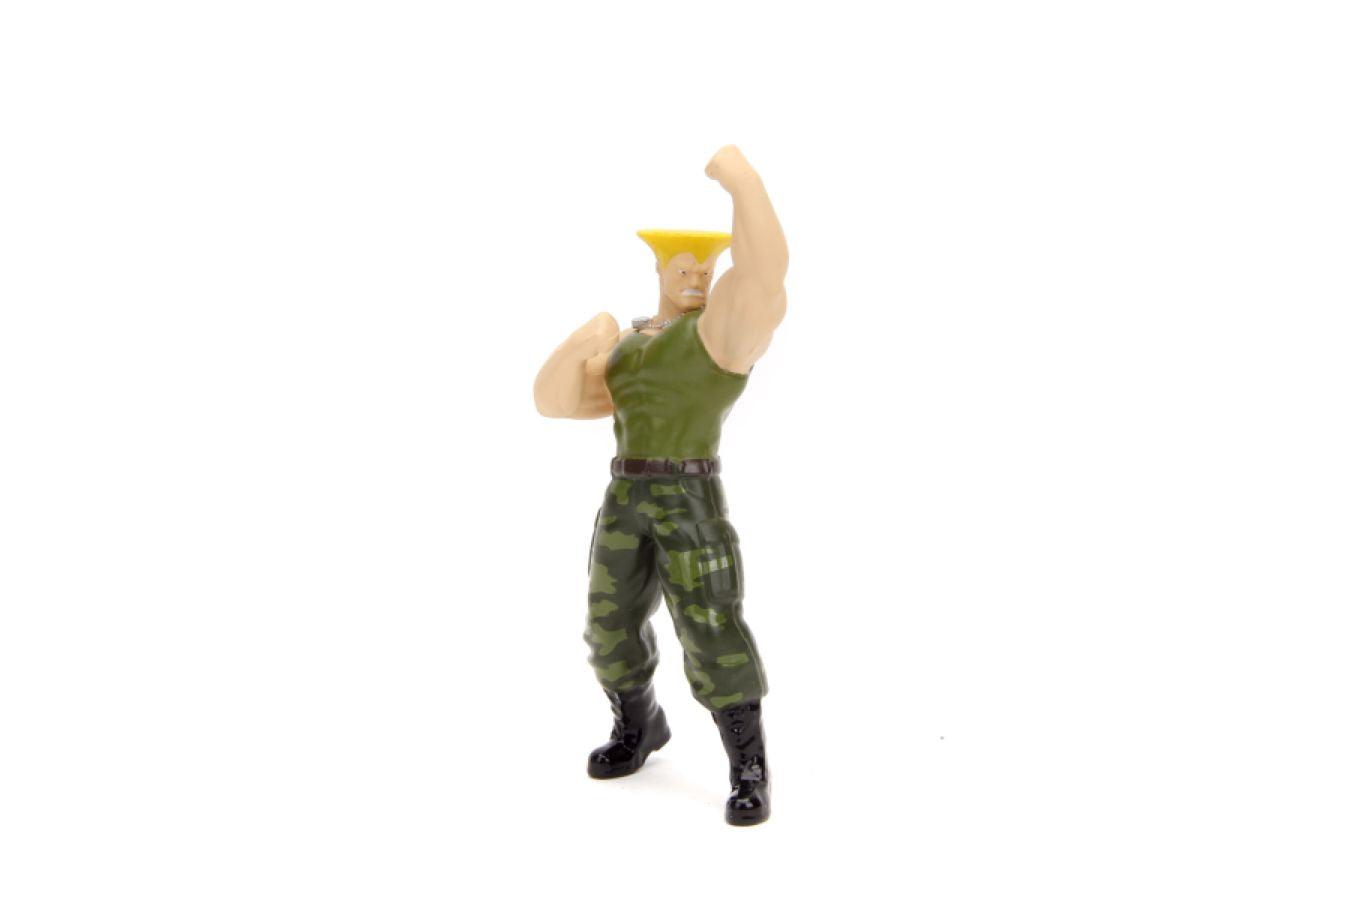 Street Fighter - Ford F-100 (1956) 1:24 with Guile Figure Hollywood Rides Diecast Vehicle Jada Toys Titan Pop Culture